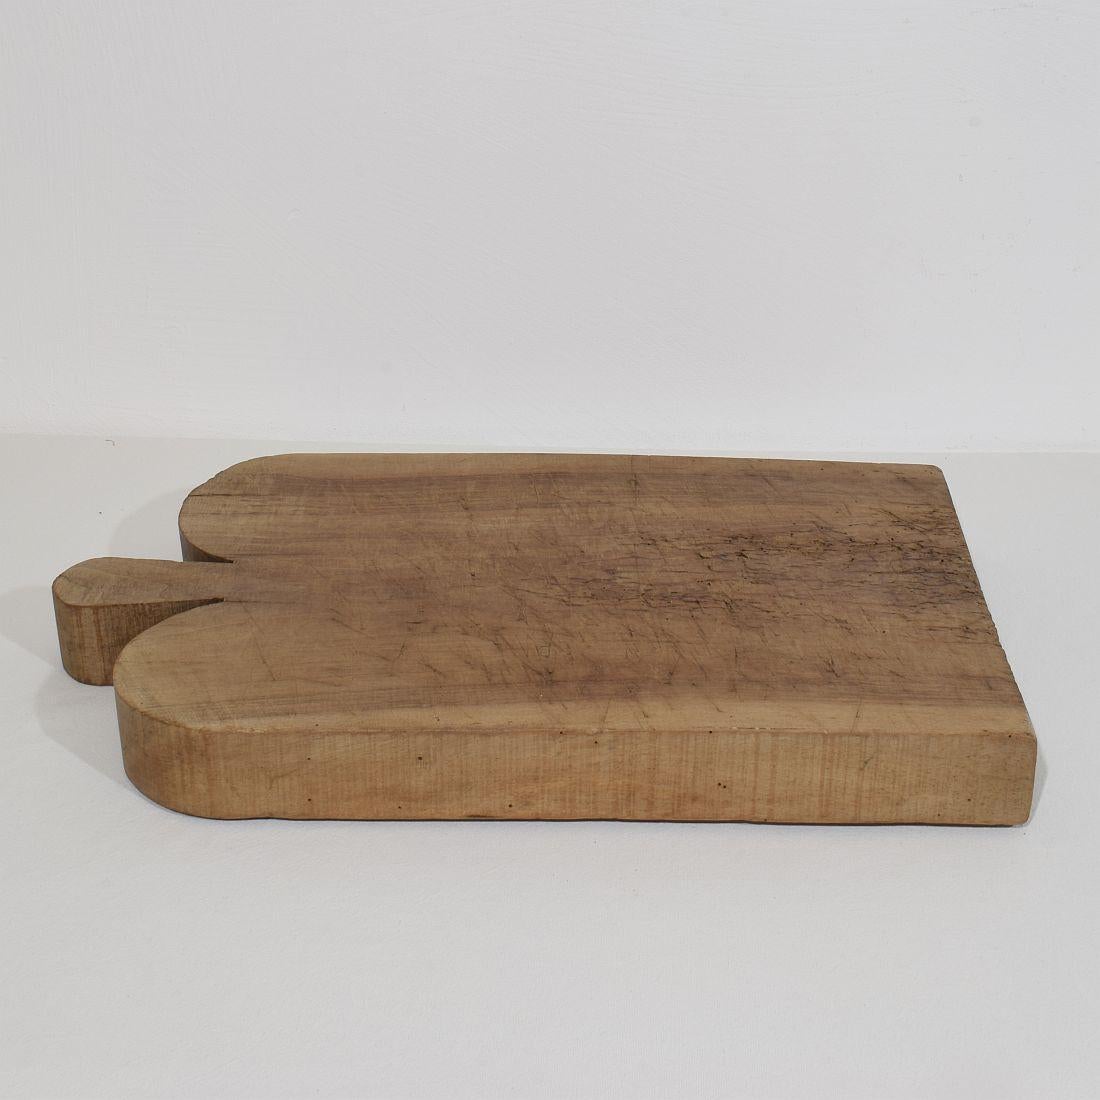 French 19th Century, Thick Wooden Chopping or Cutting Board 10